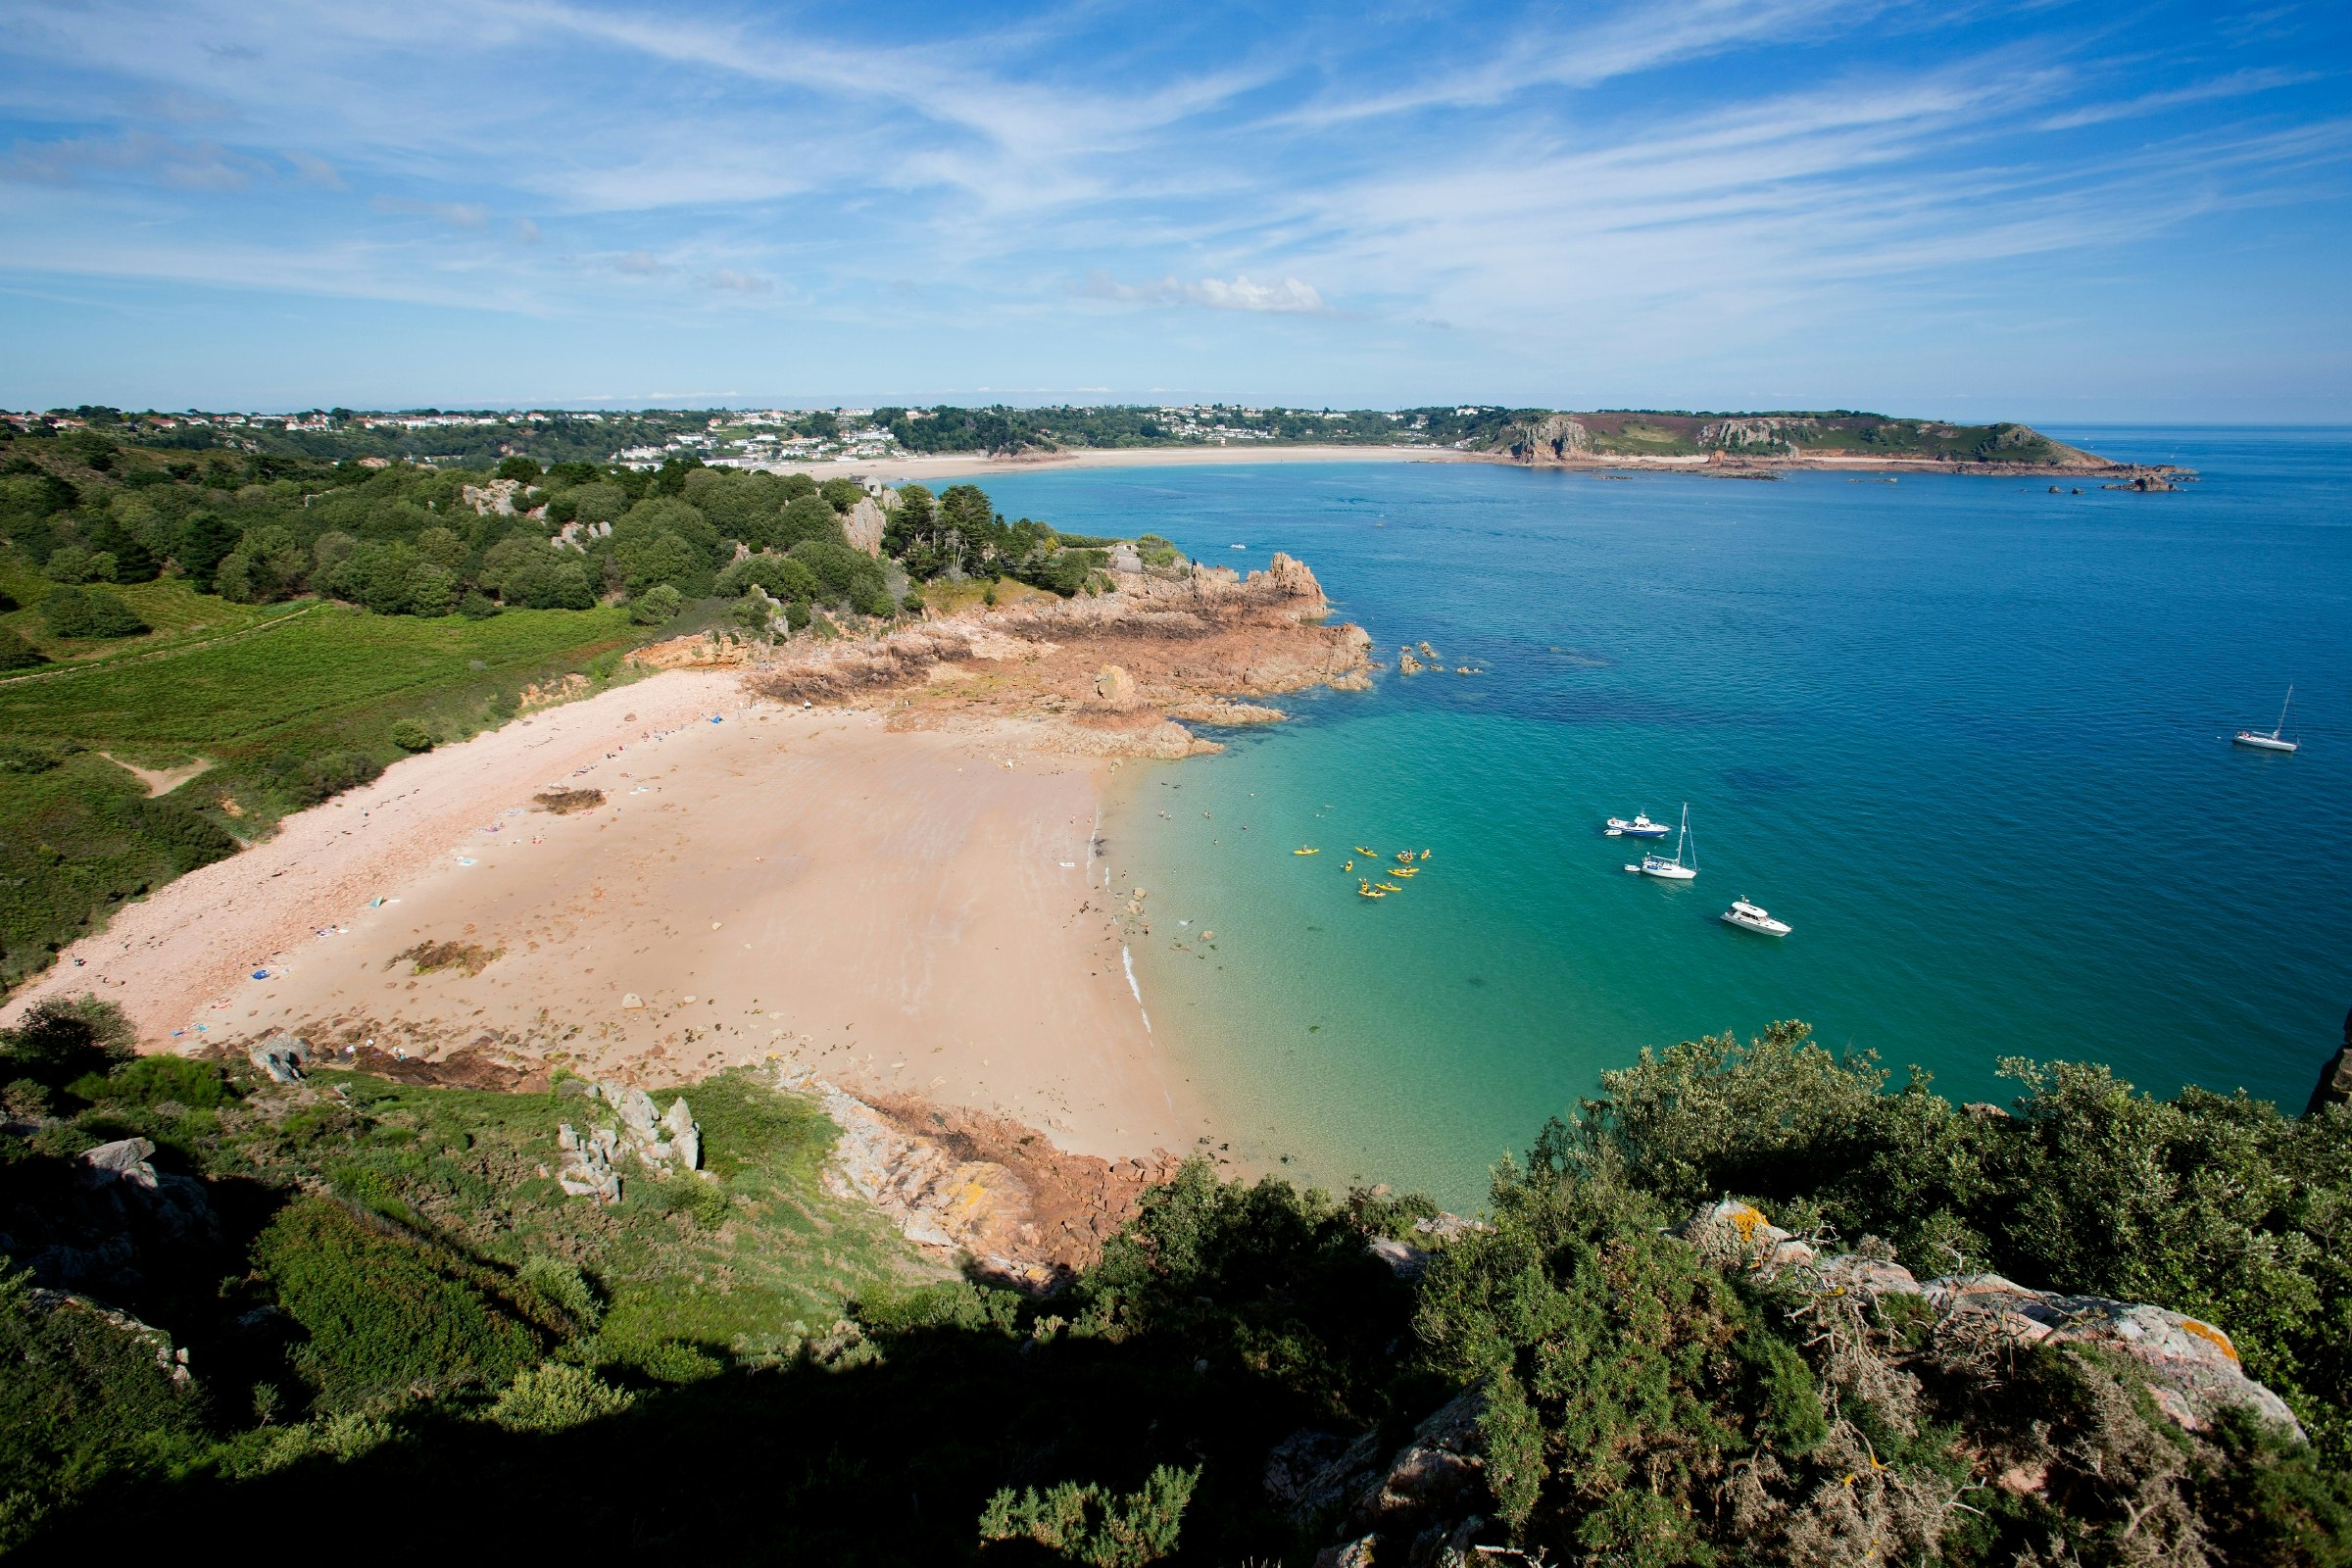 Overview of Beauport Bay on south coast of Jersey.